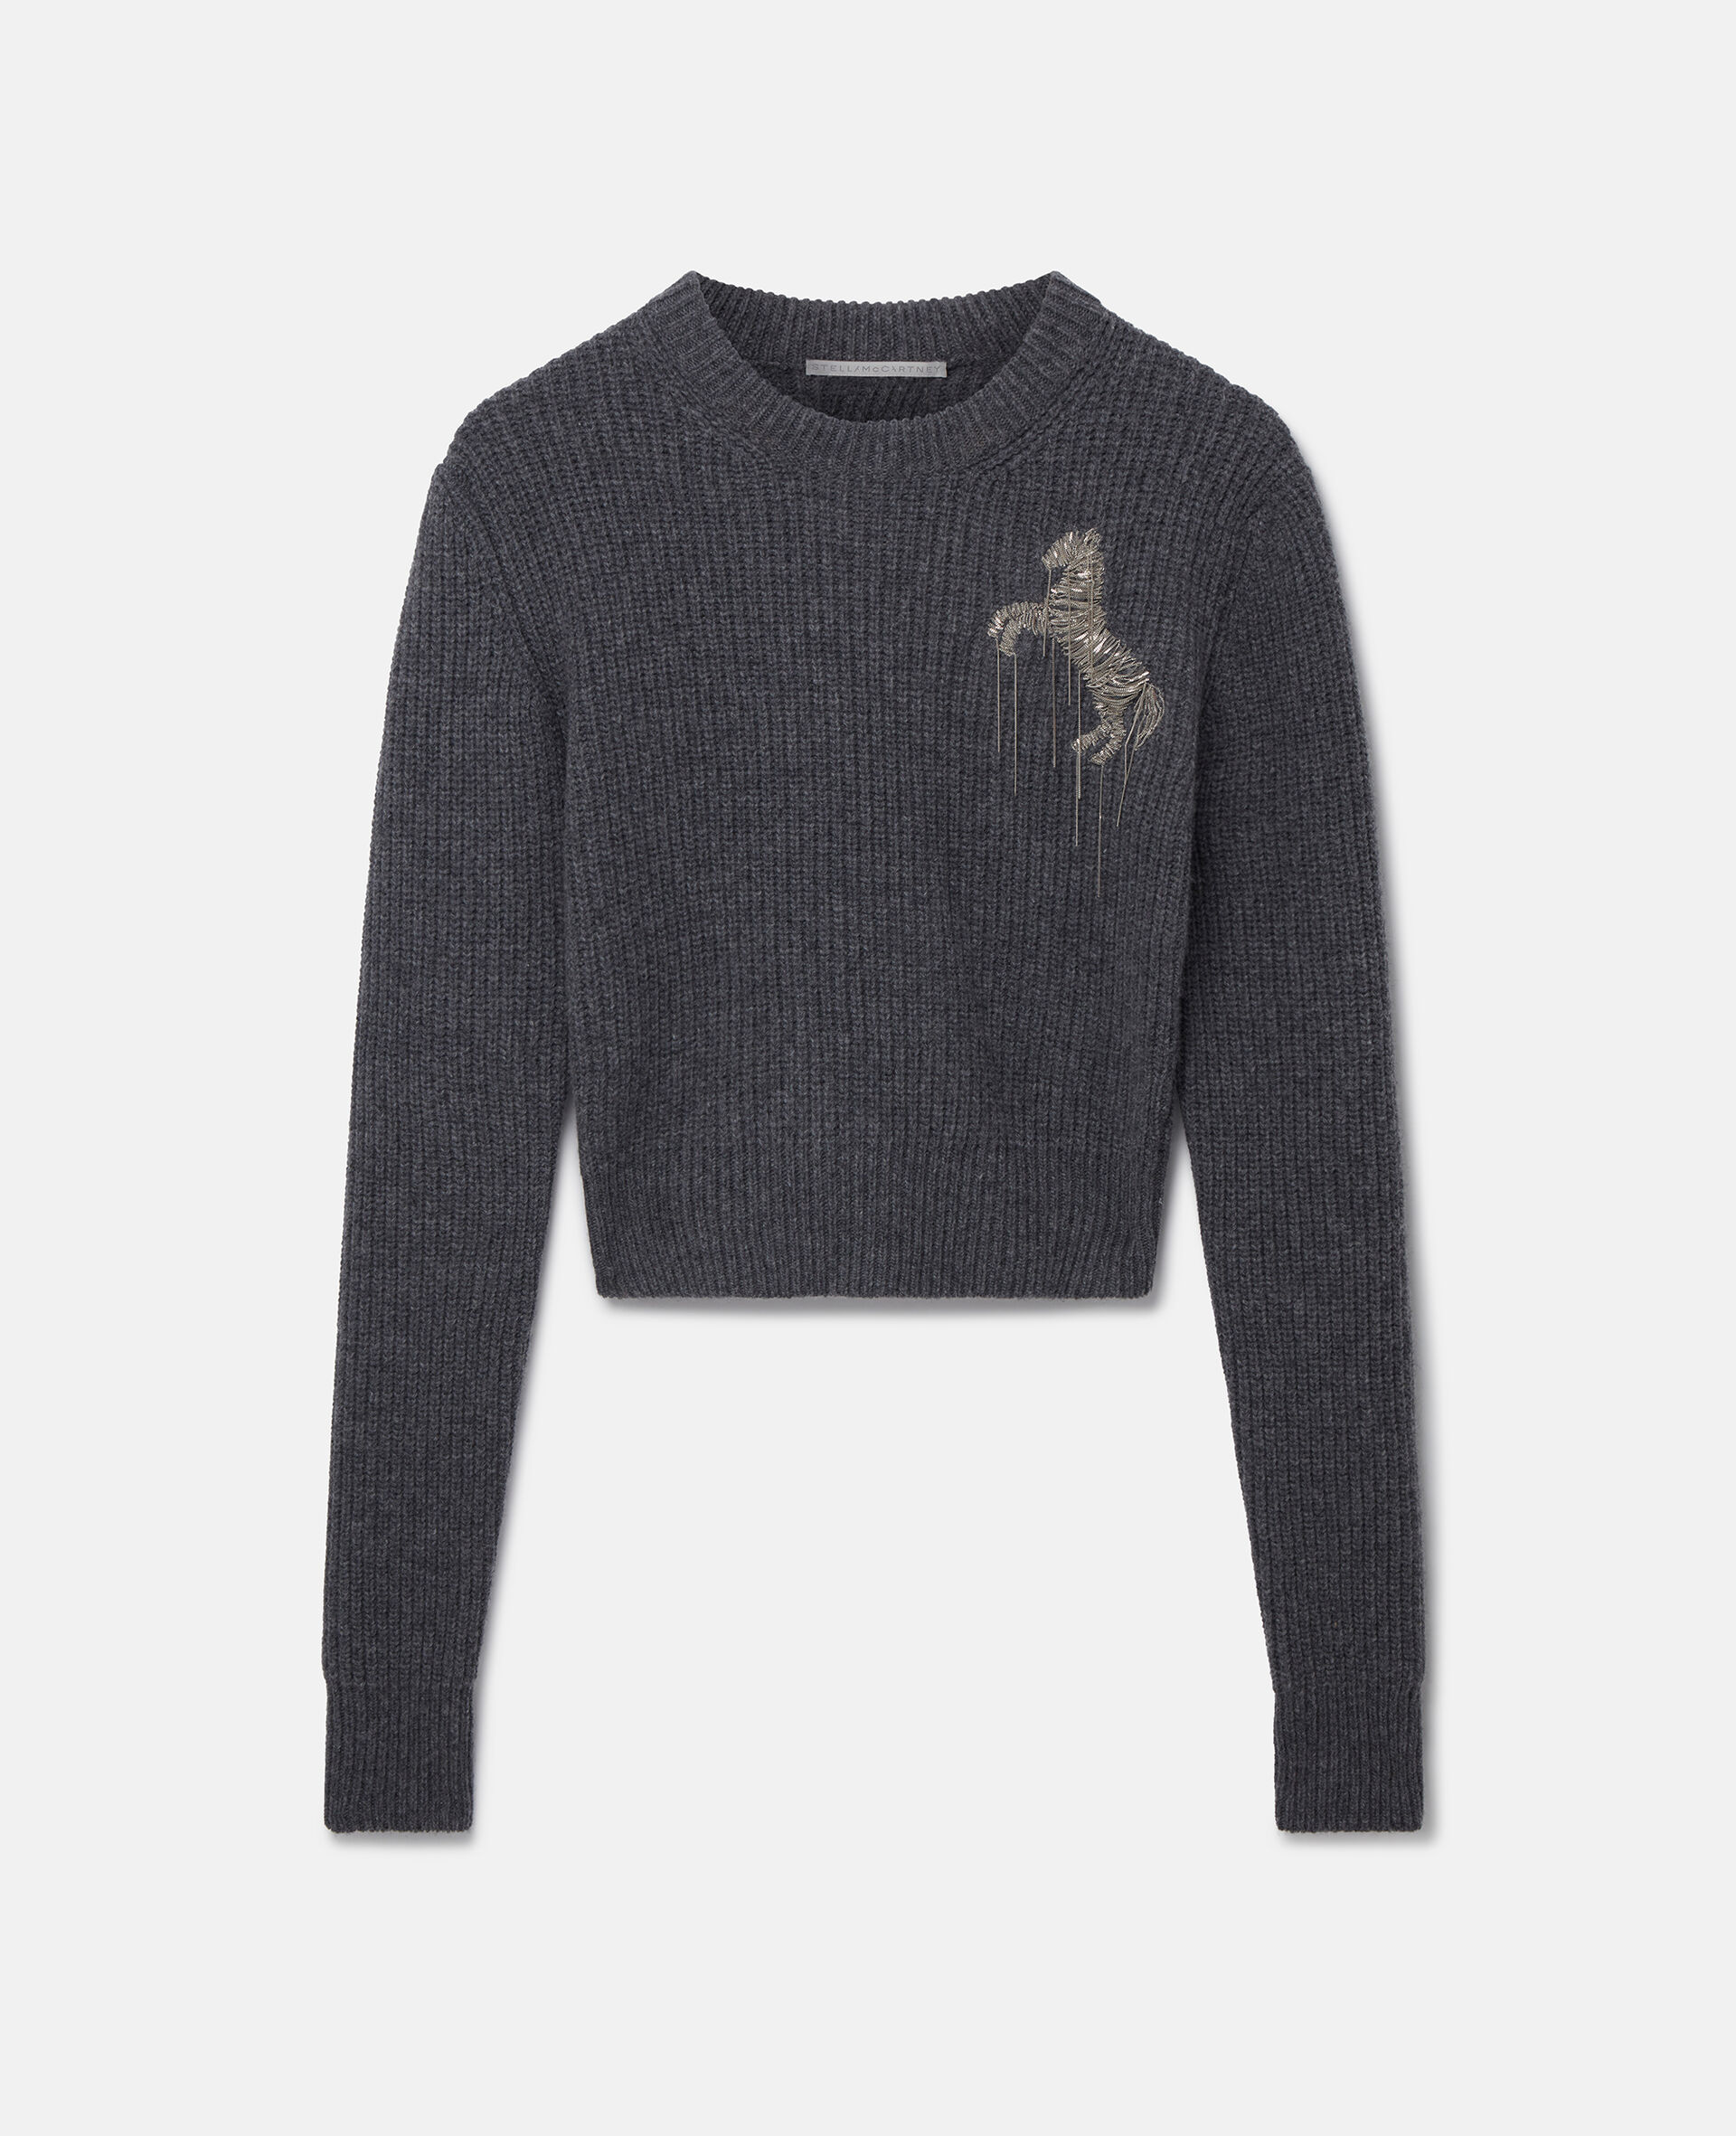 Horse Chain Embroidery Cropped Jumper-Multicoloured-large image number 0